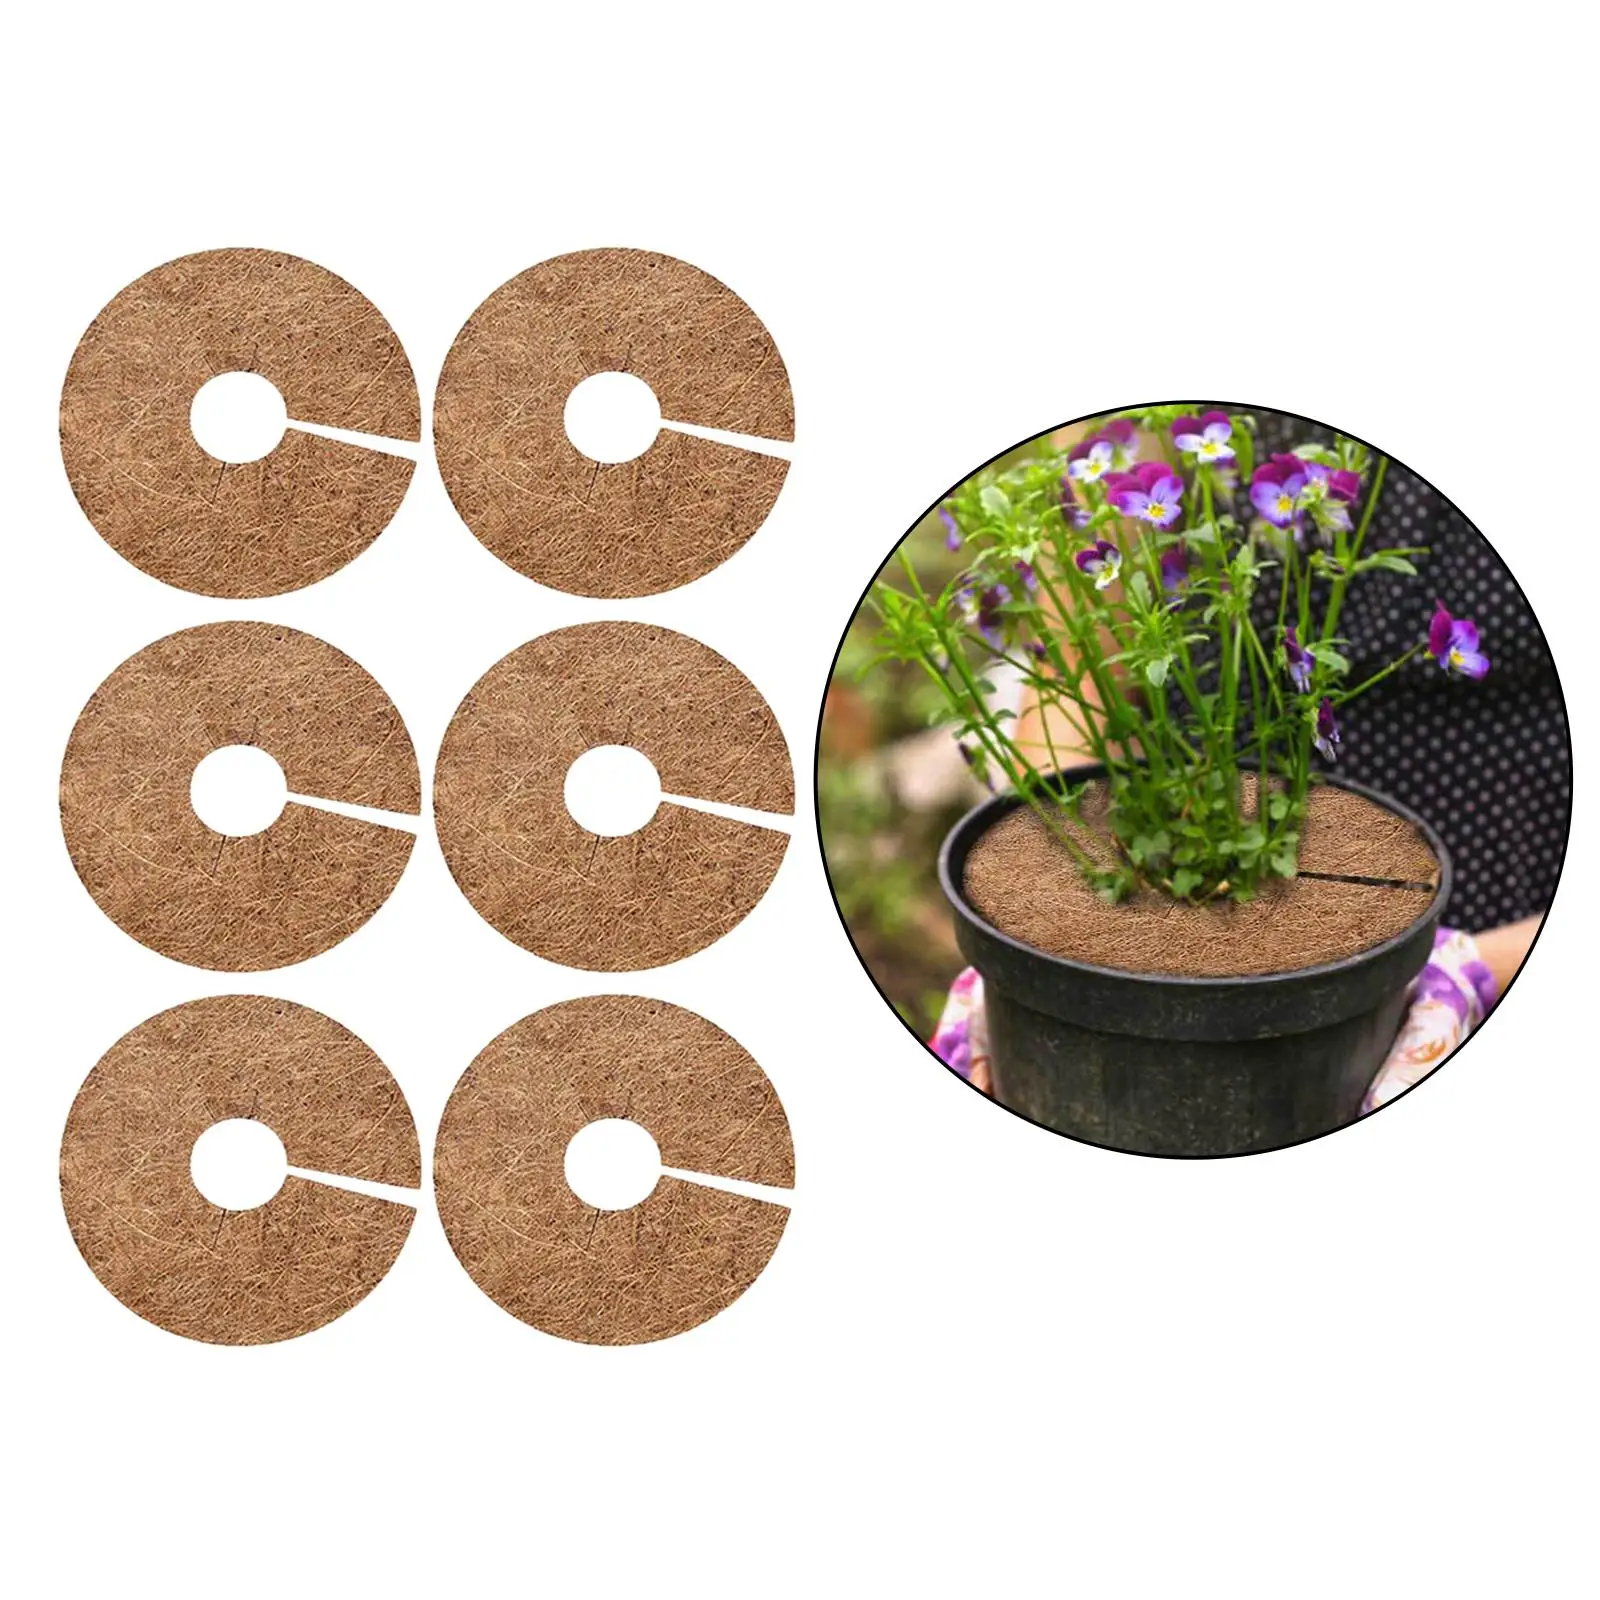 Coir Fiber Liner Round Coconut Natural Coconut Fibers Weed Control Rings For Weed Control Plant Cover Flower Pot